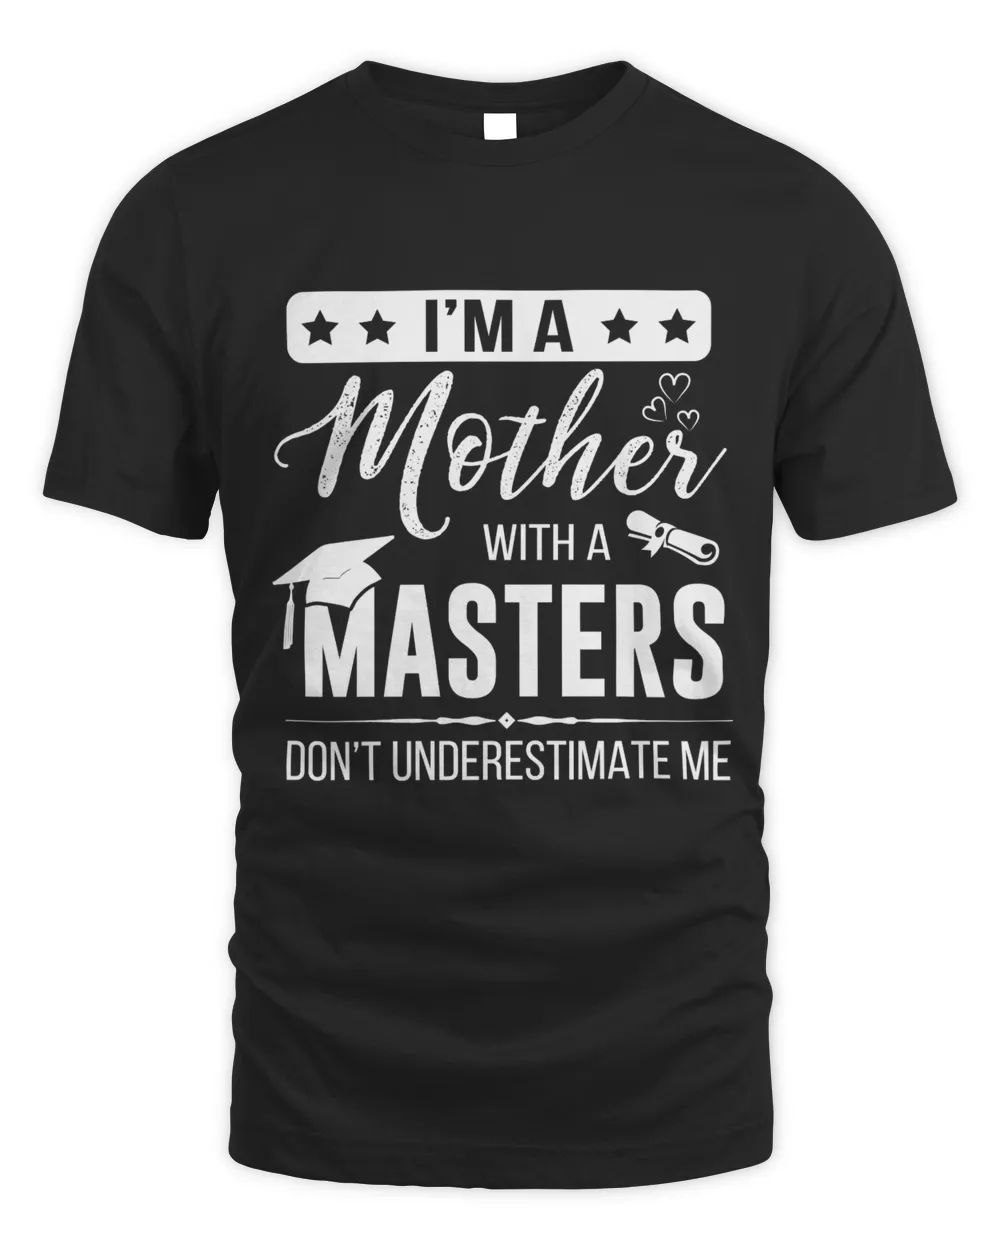 I'm a mother with a masters don't underestimate me